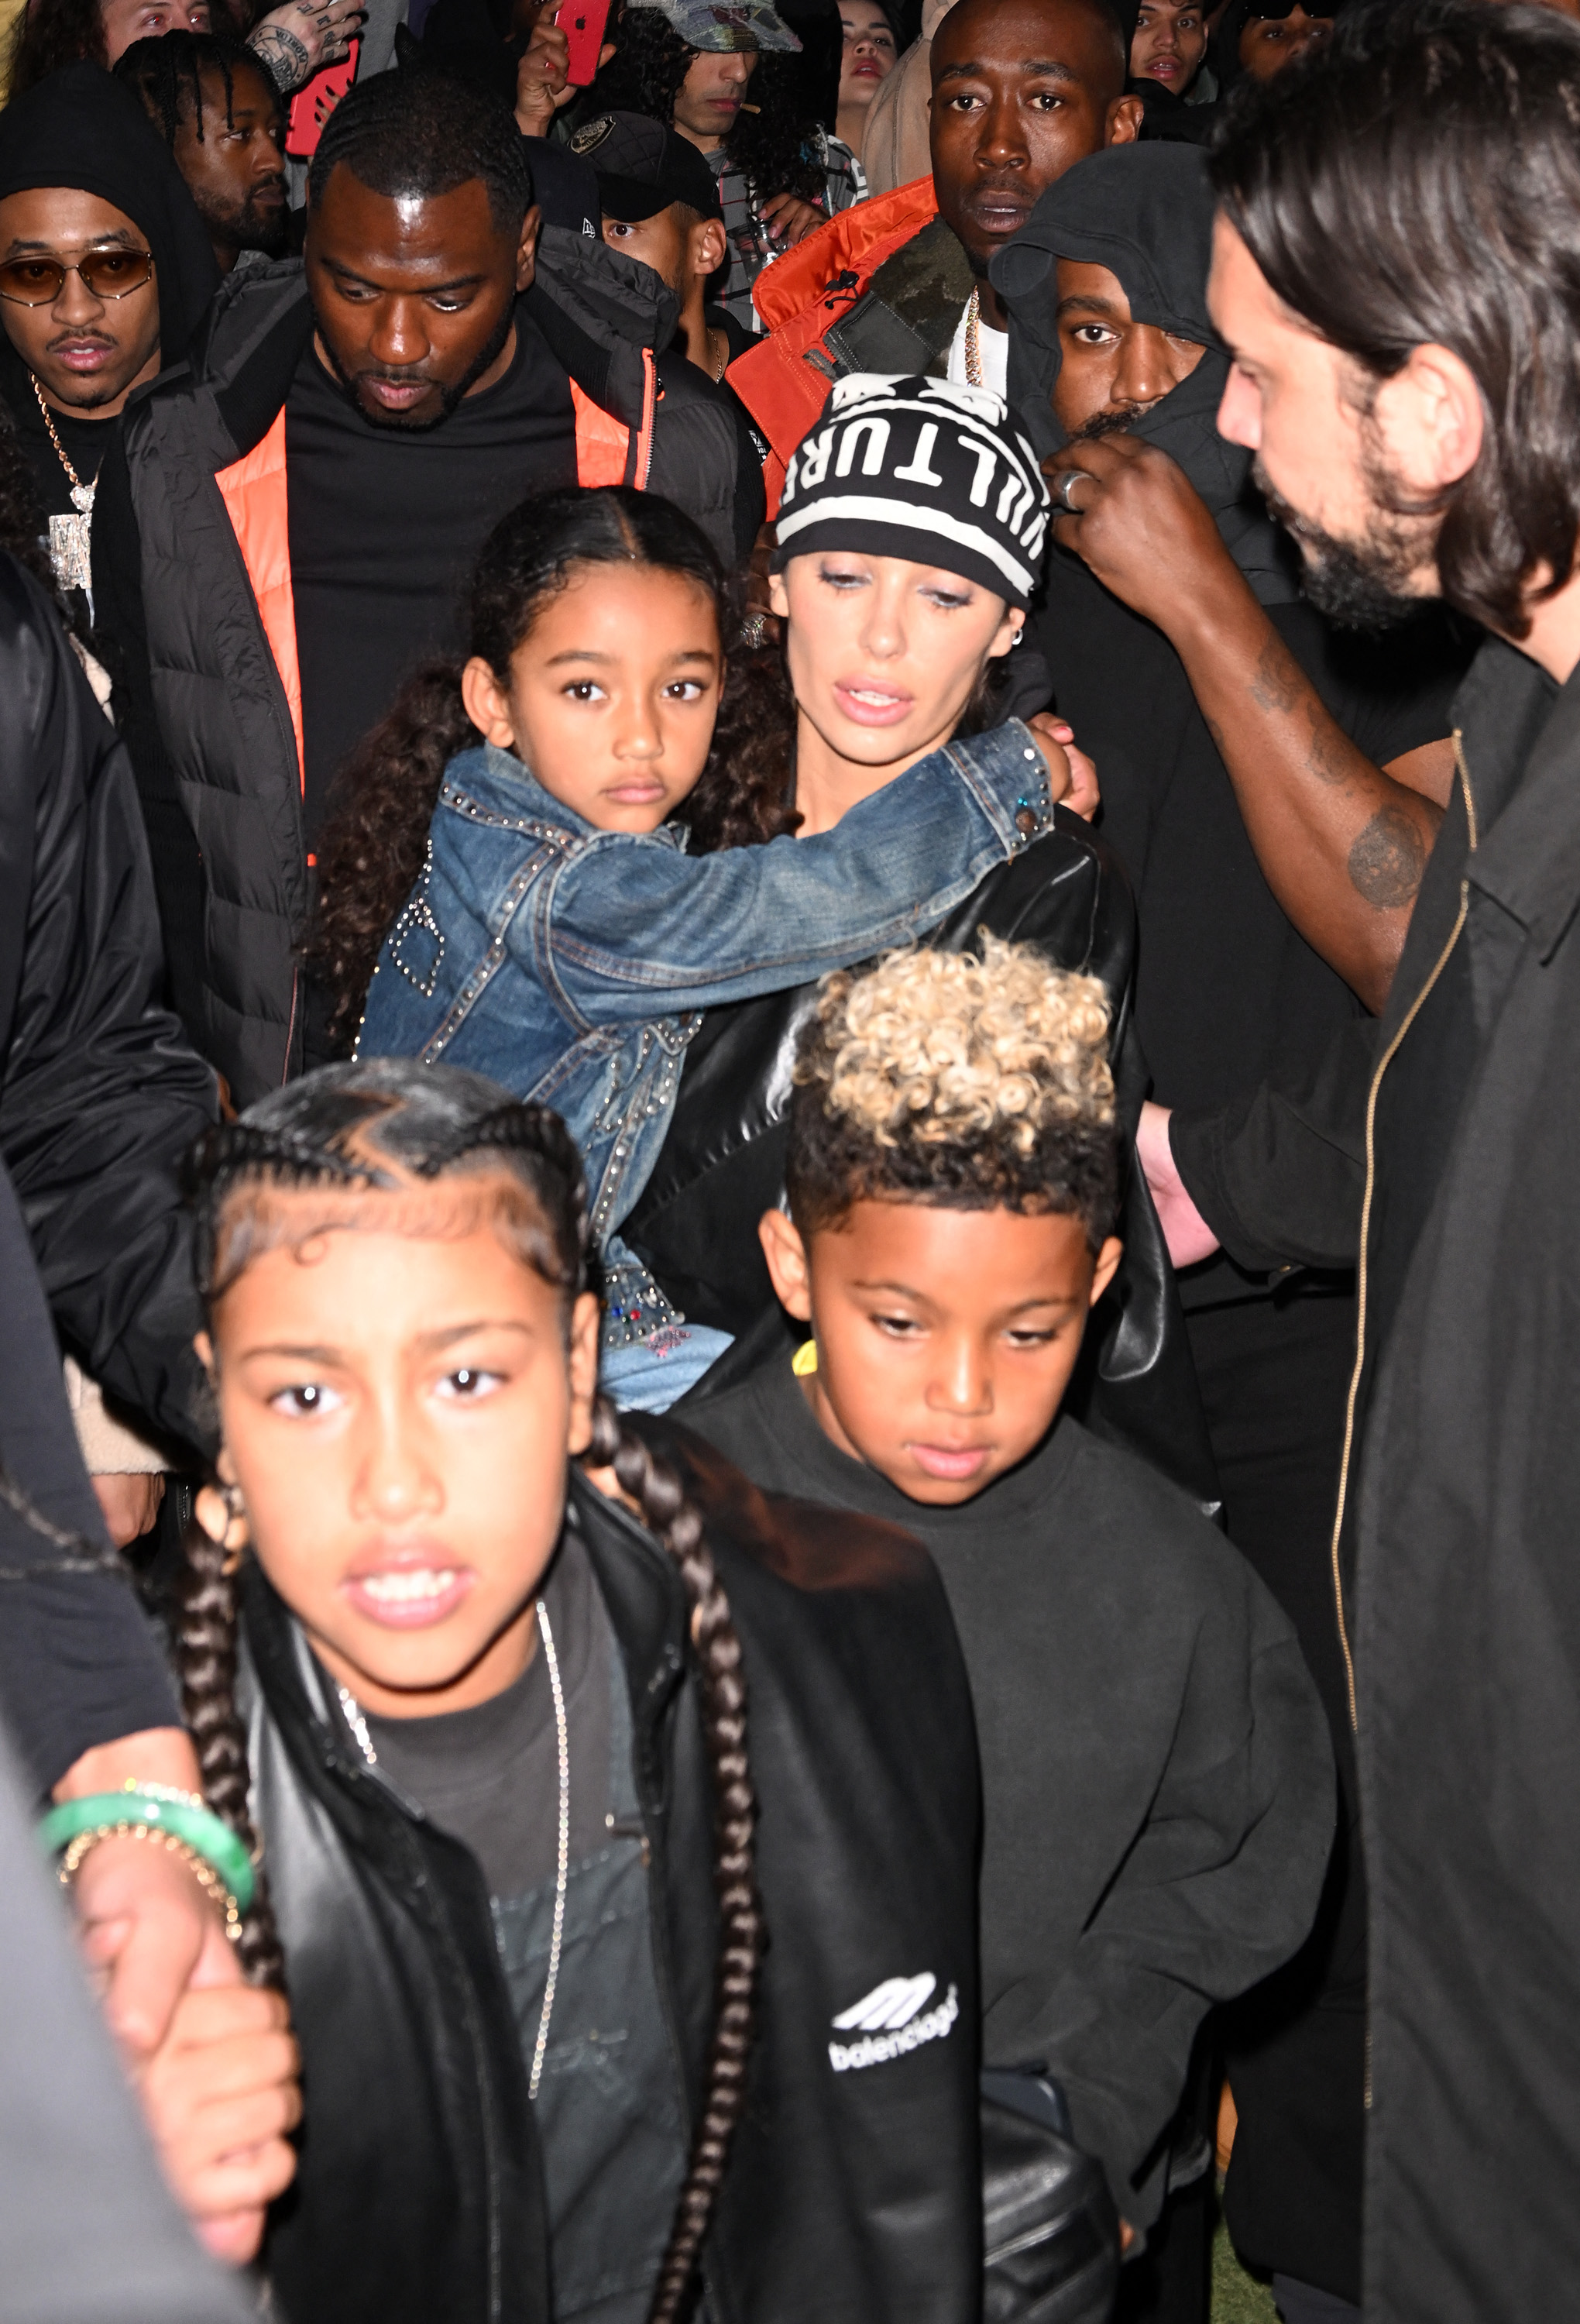 This wasn't the first time fans claimed North looked 'too grown'